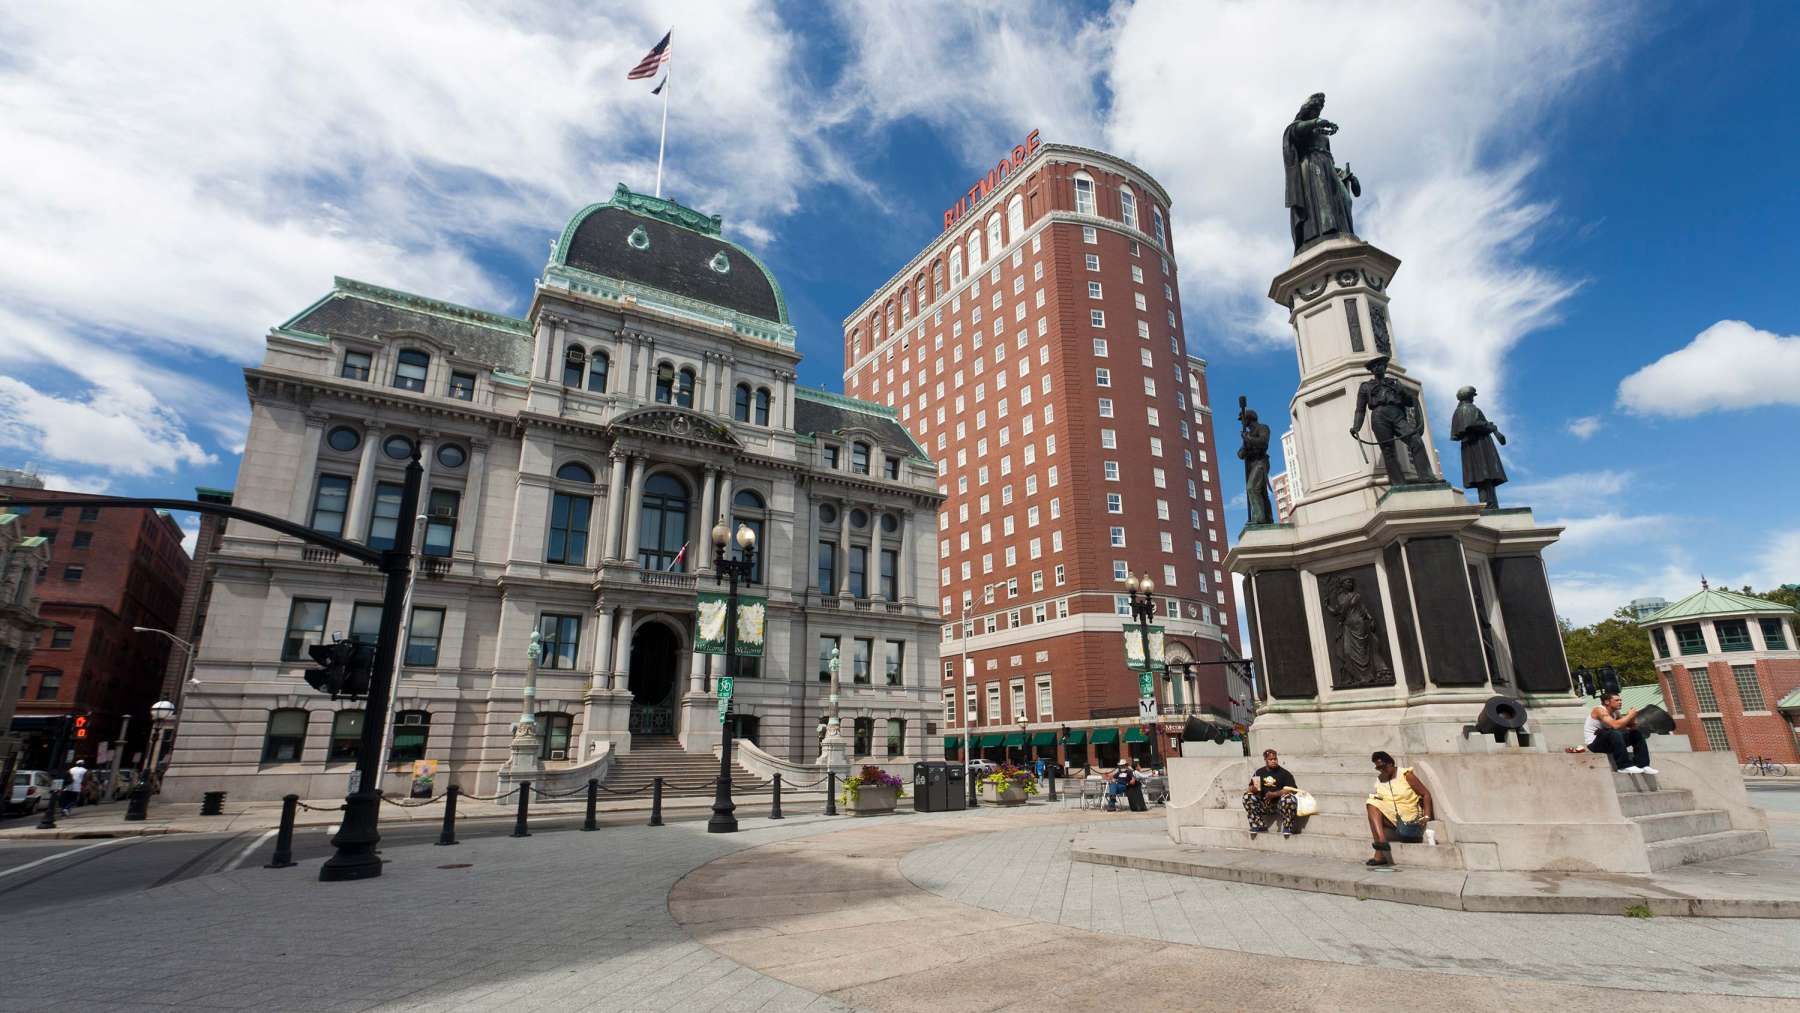 Campaign donations may supply a clue as to why Providence seeks to approve sweetheart developer deals